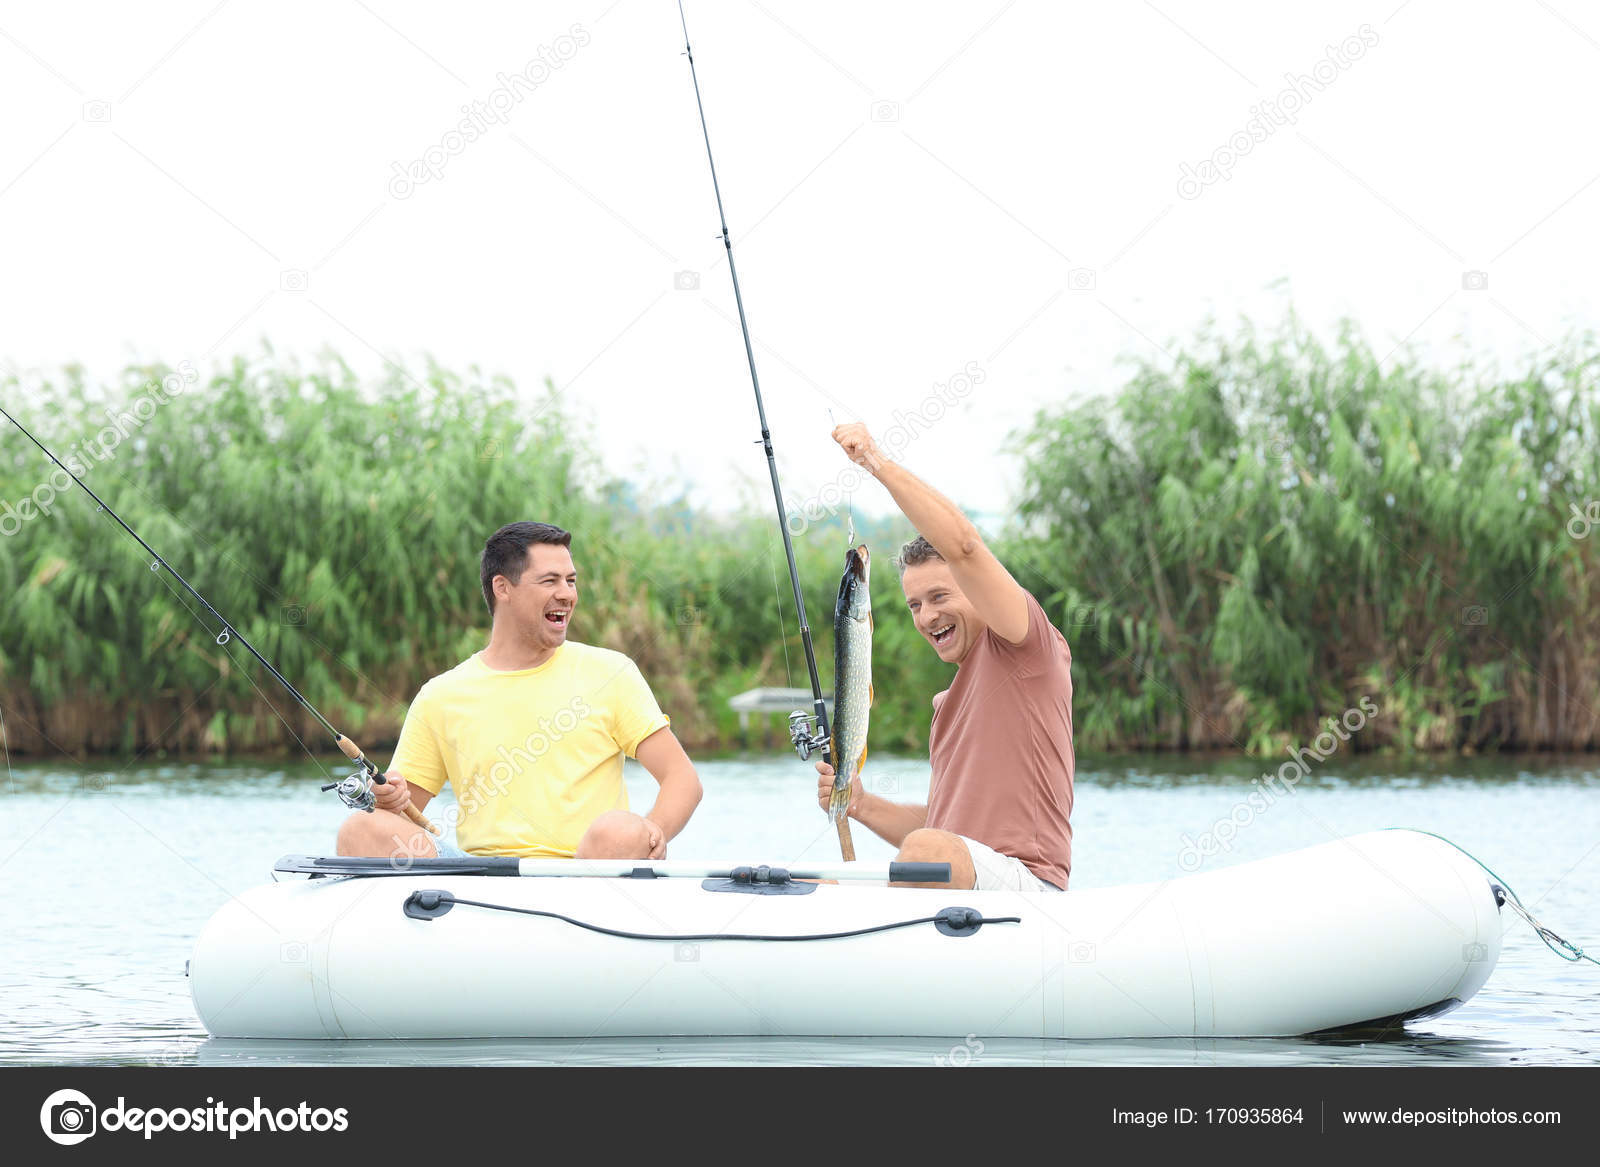 Two men fishing from inflatable boat on river Stock Photo by